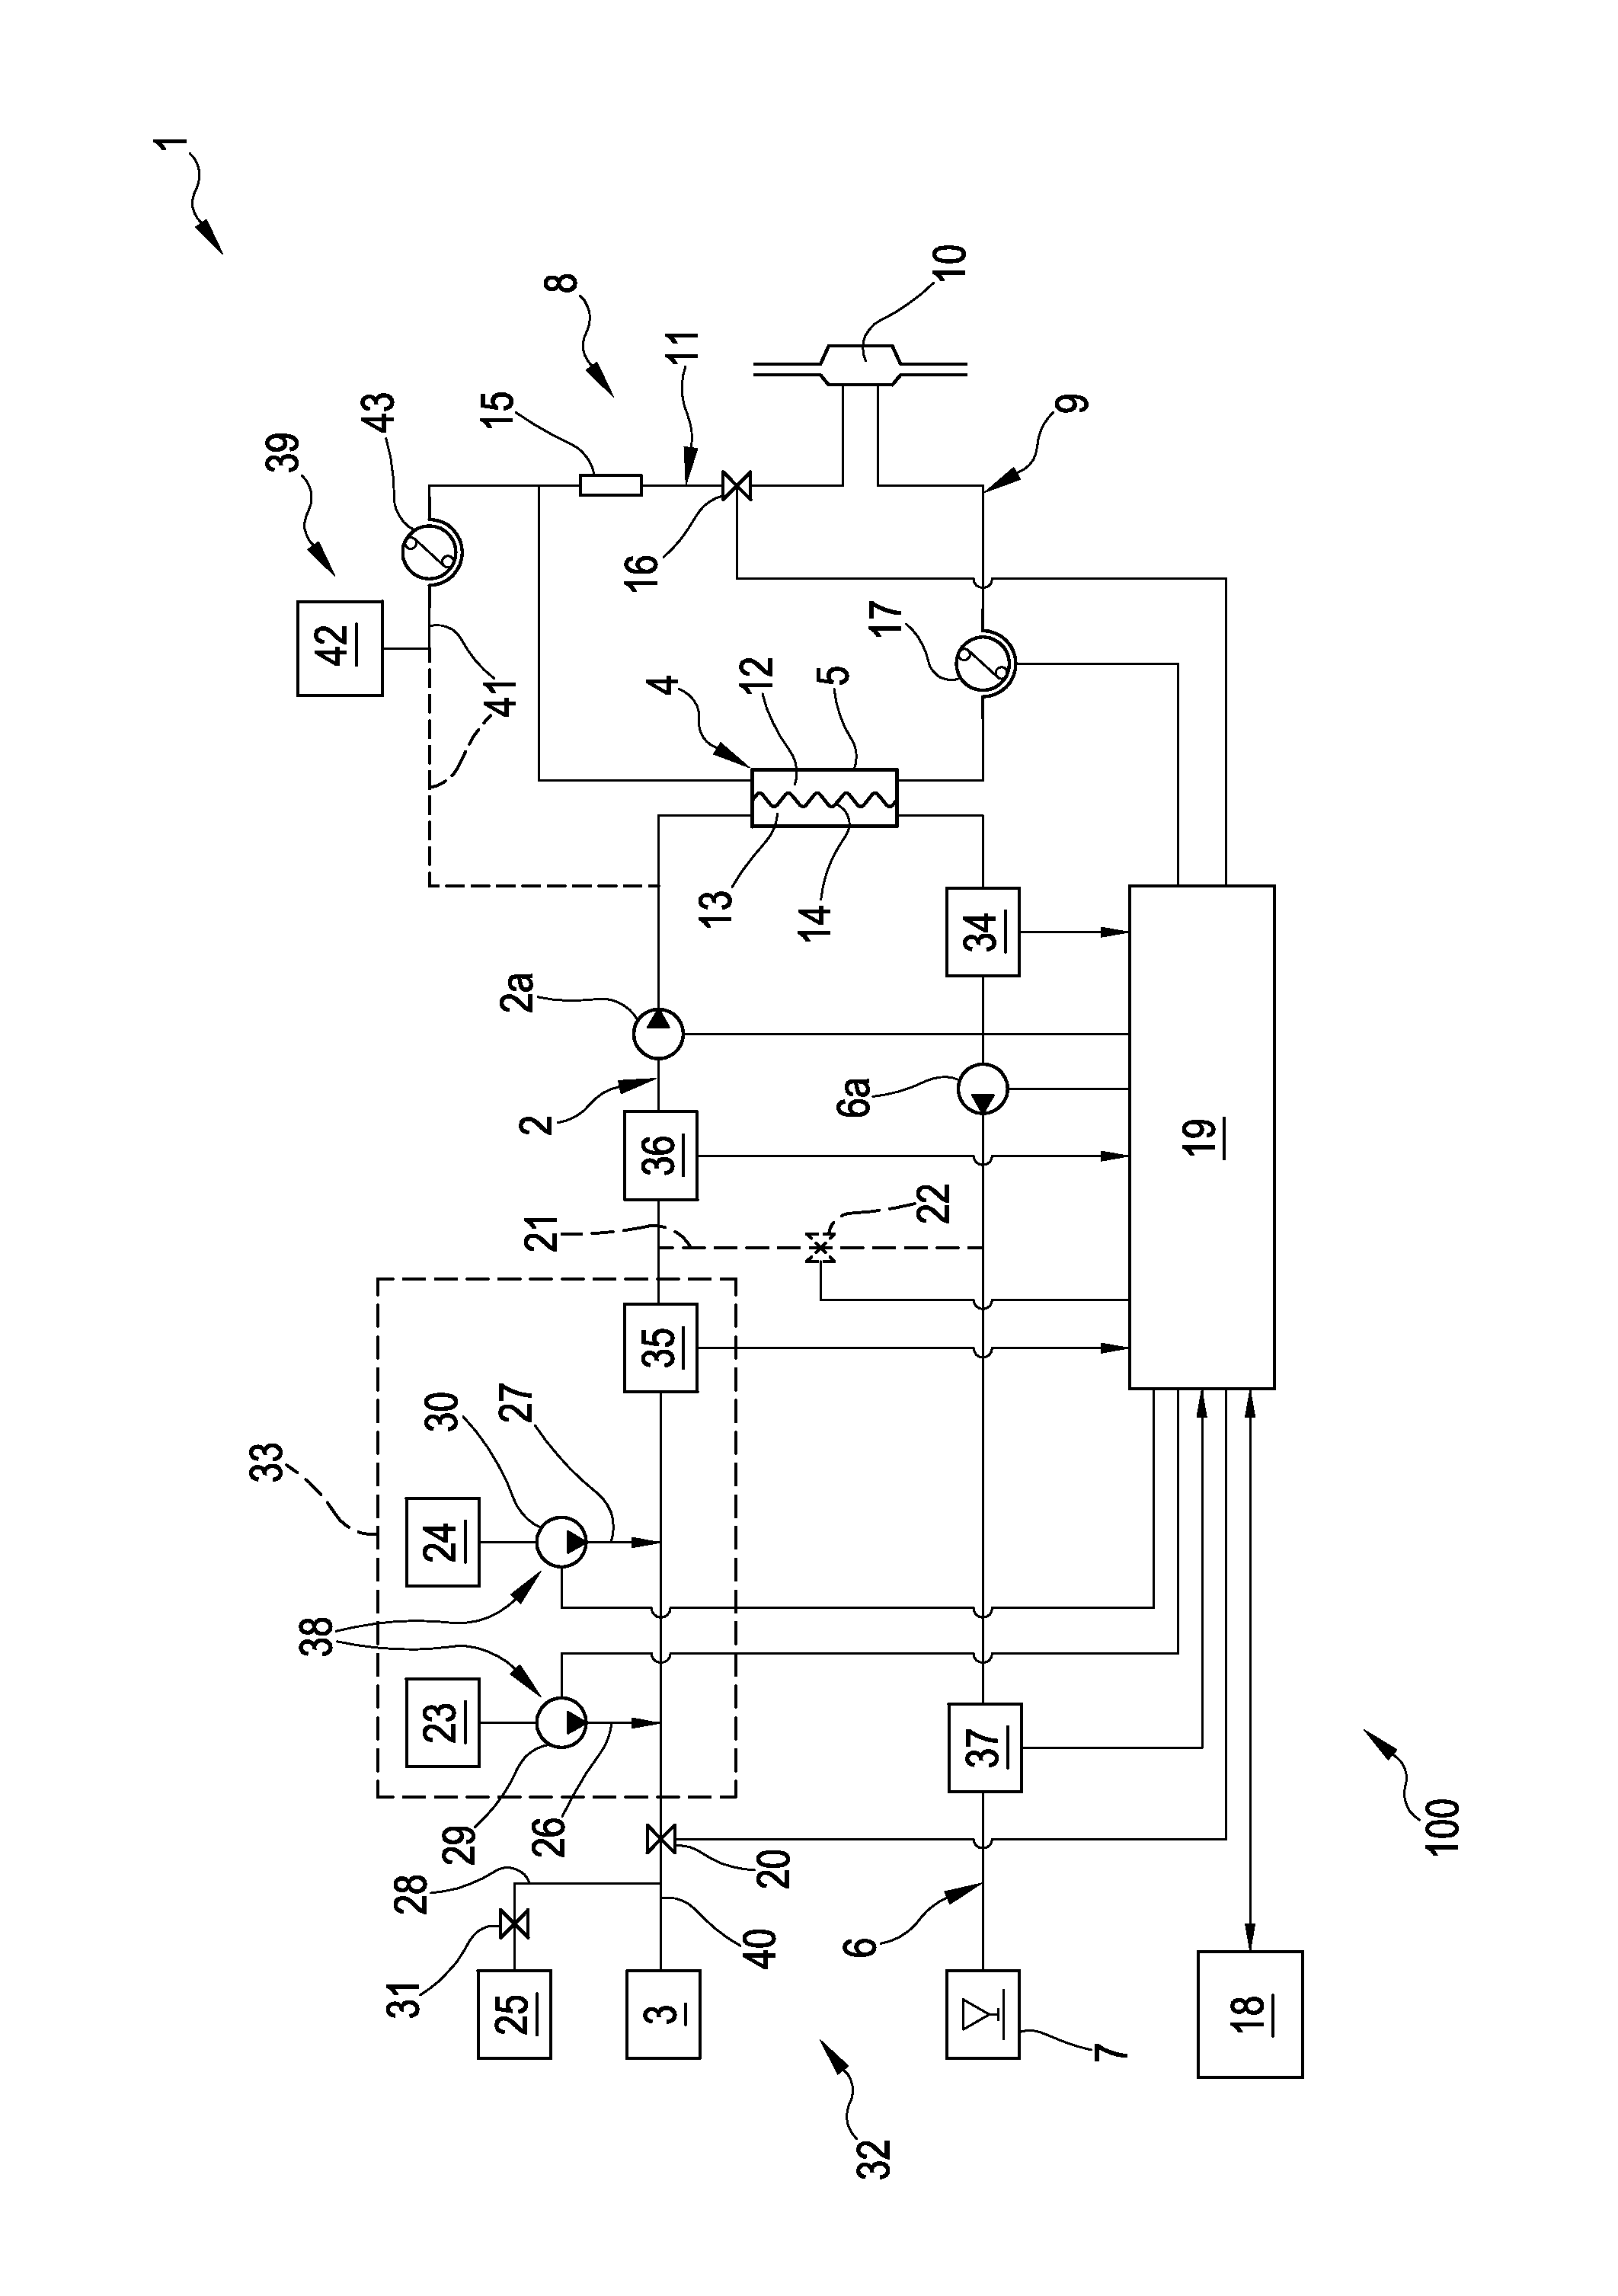 Dialysis apparatus and method for controlling a dialysis apparatus